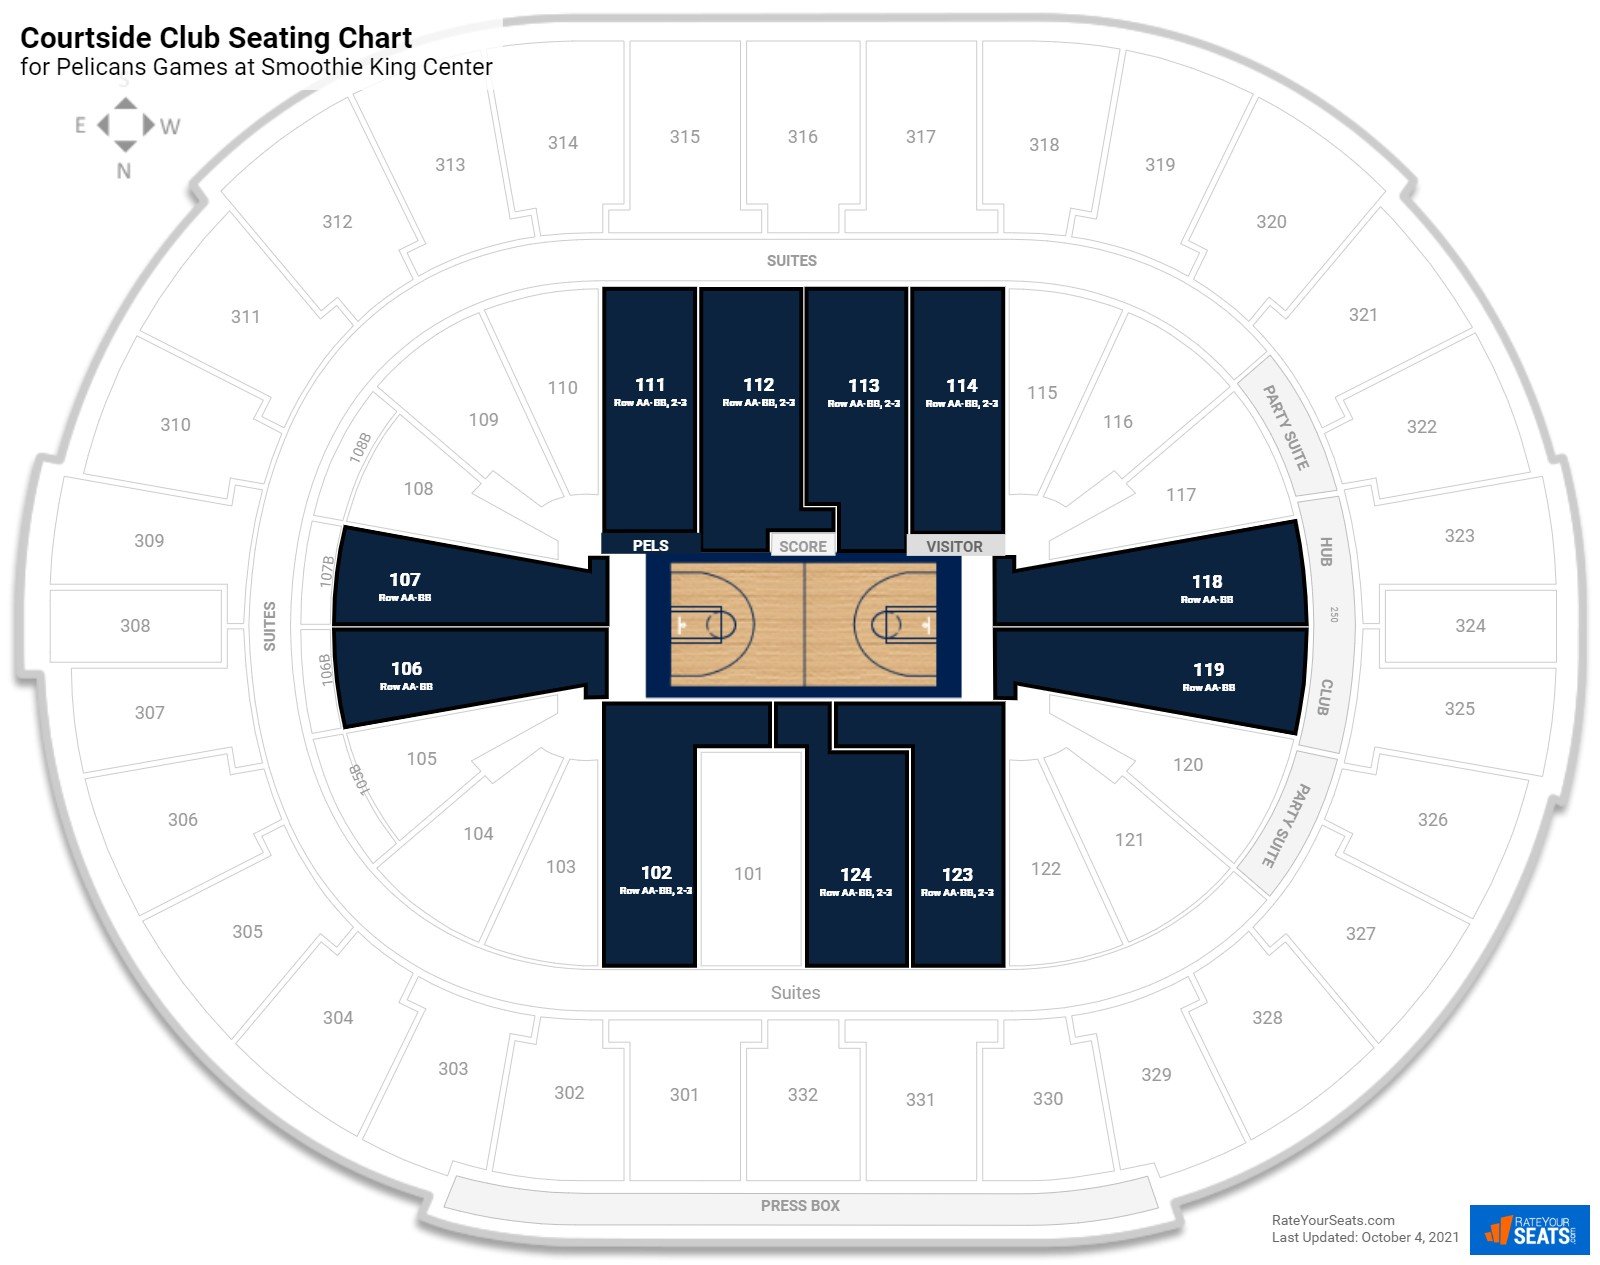 Pelicans Courtside Club Seating Chart at Smoothie King Center